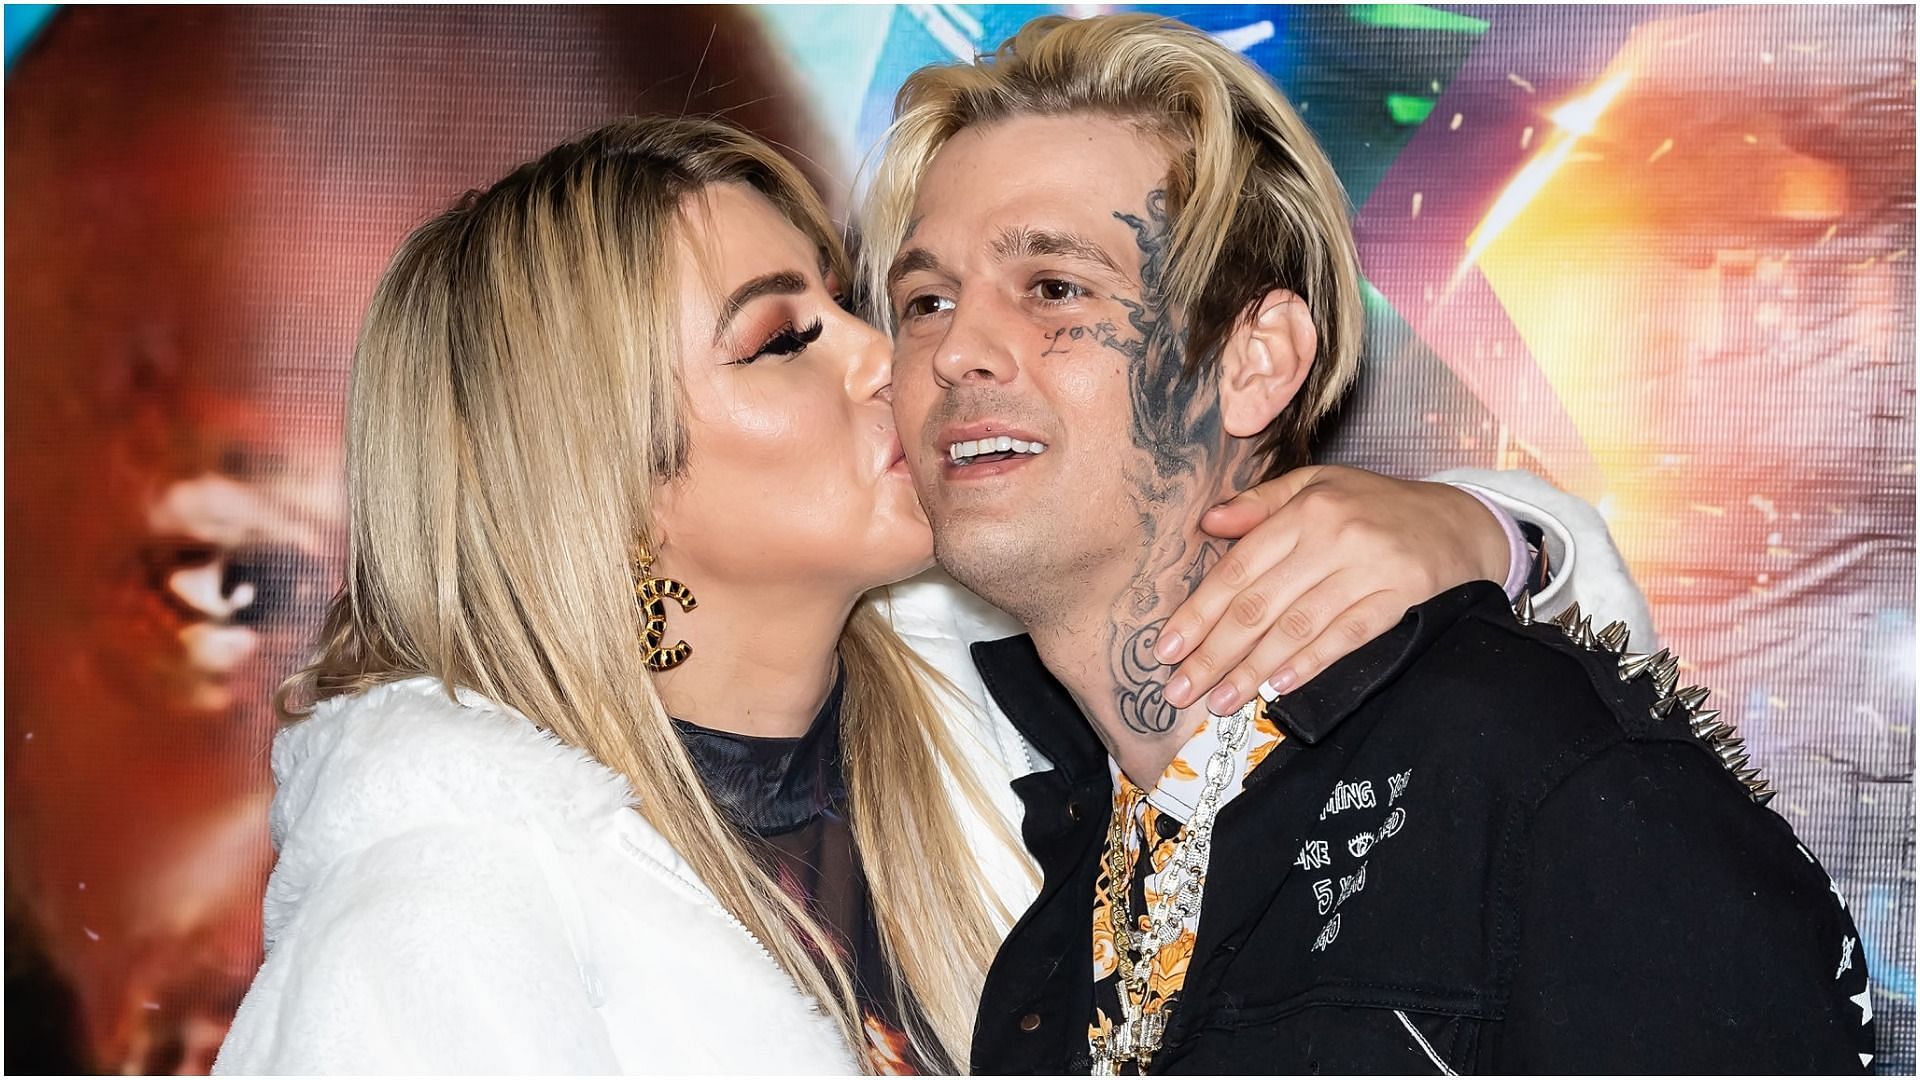 Aaron Carter and Melanie Martin have recently announced their split (Image by Gilbert Carrasquillo via Getty Images)